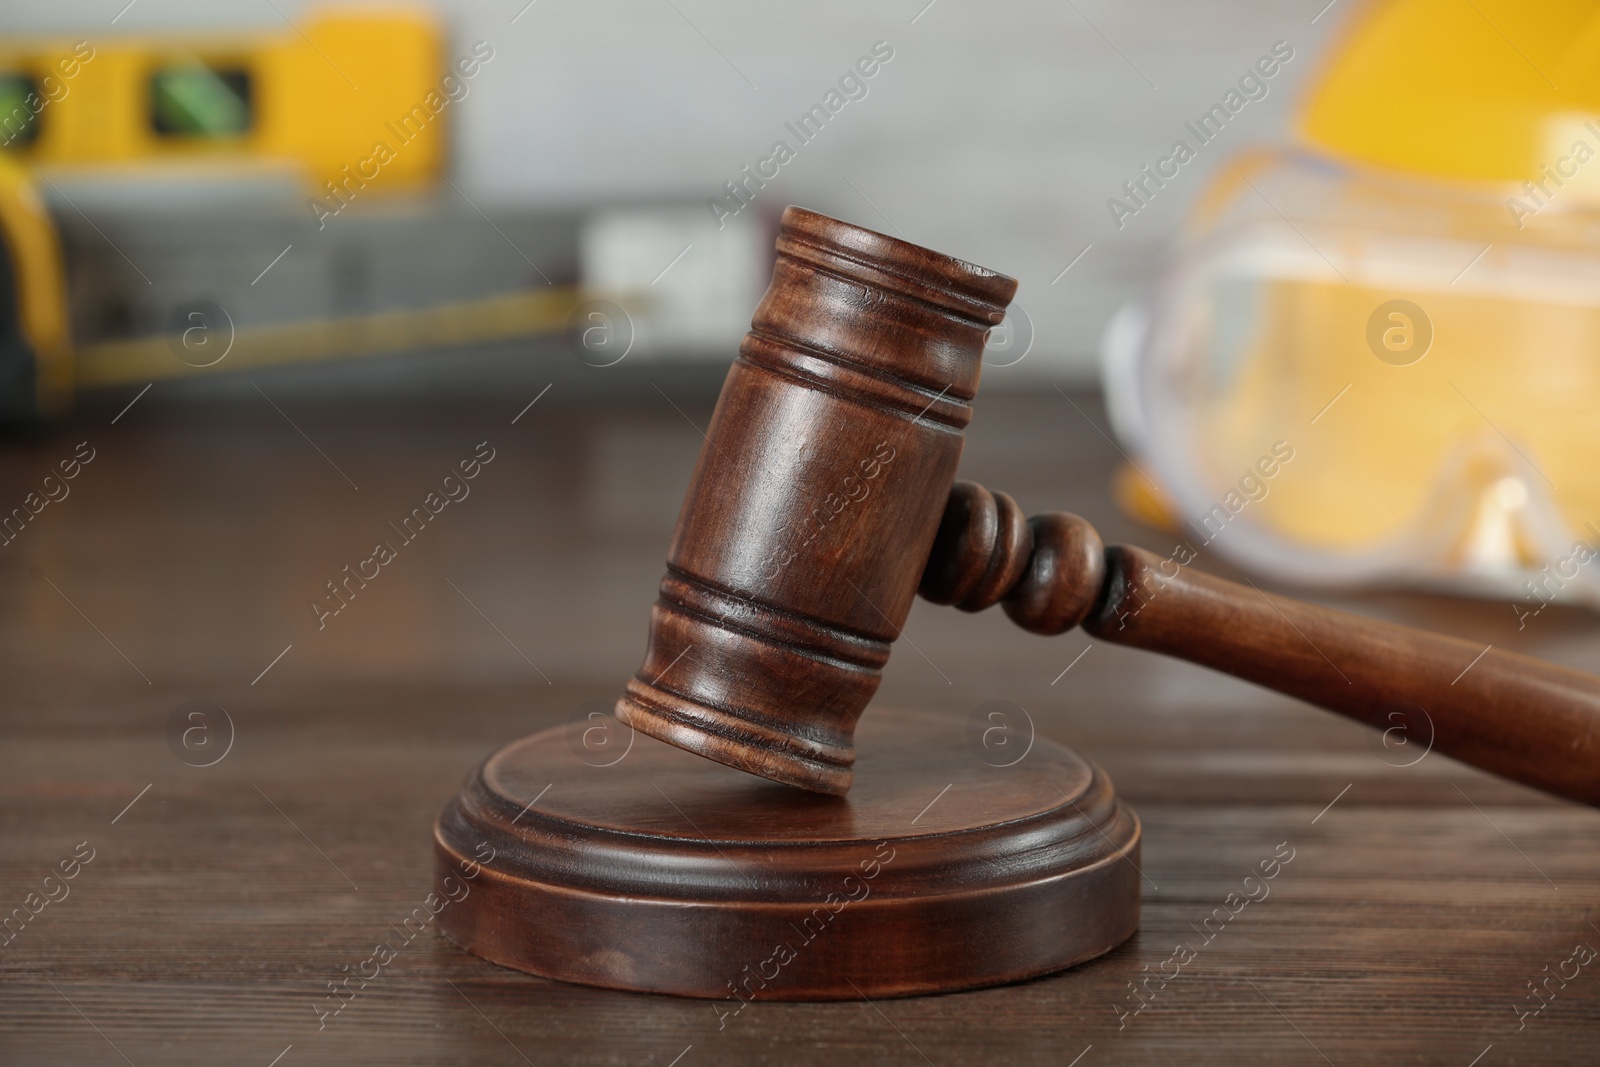 Photo of Construction and land law concepts. Judge gavel, protective helmet, safety glasses, ruler with level on wooden table